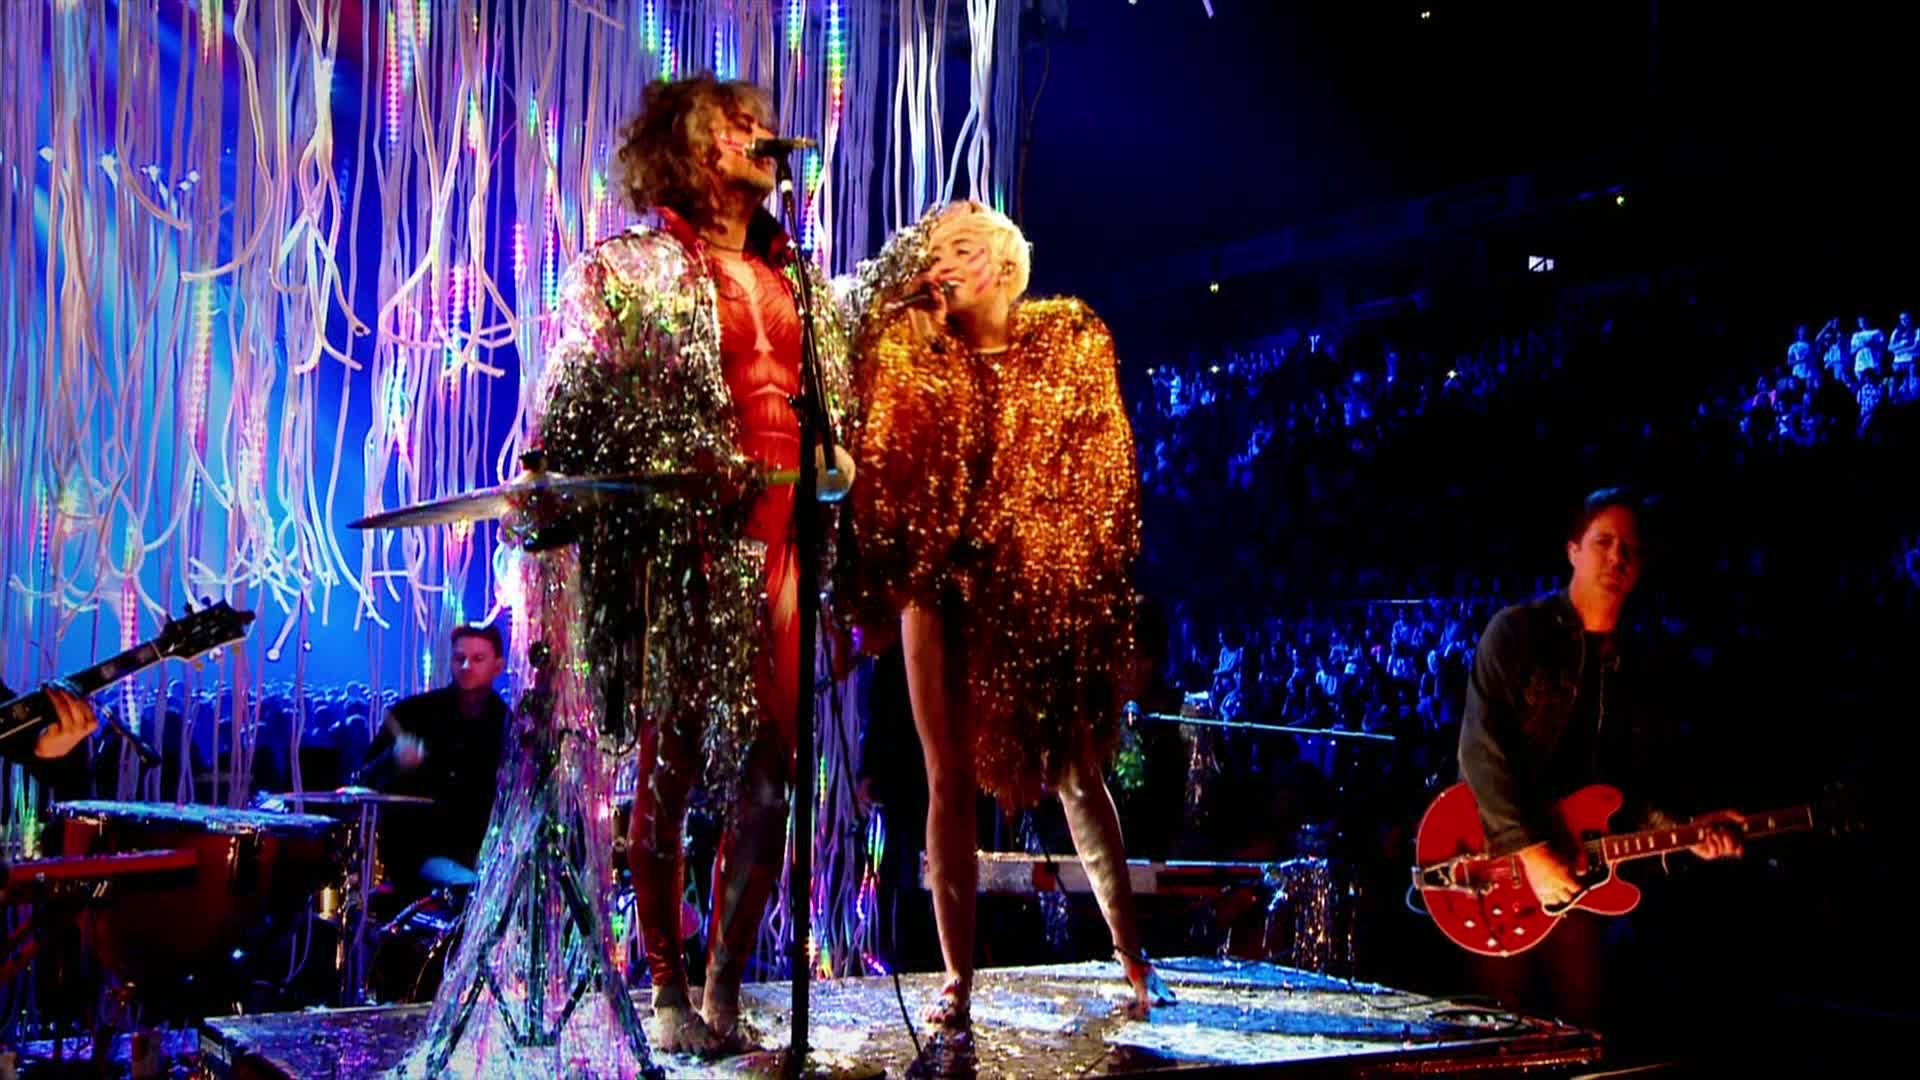 Miley Cyrus [ft The Flaming Lips] - 2014-05-18, Billboard Music Awards - 1080 TS - LSD preview 12